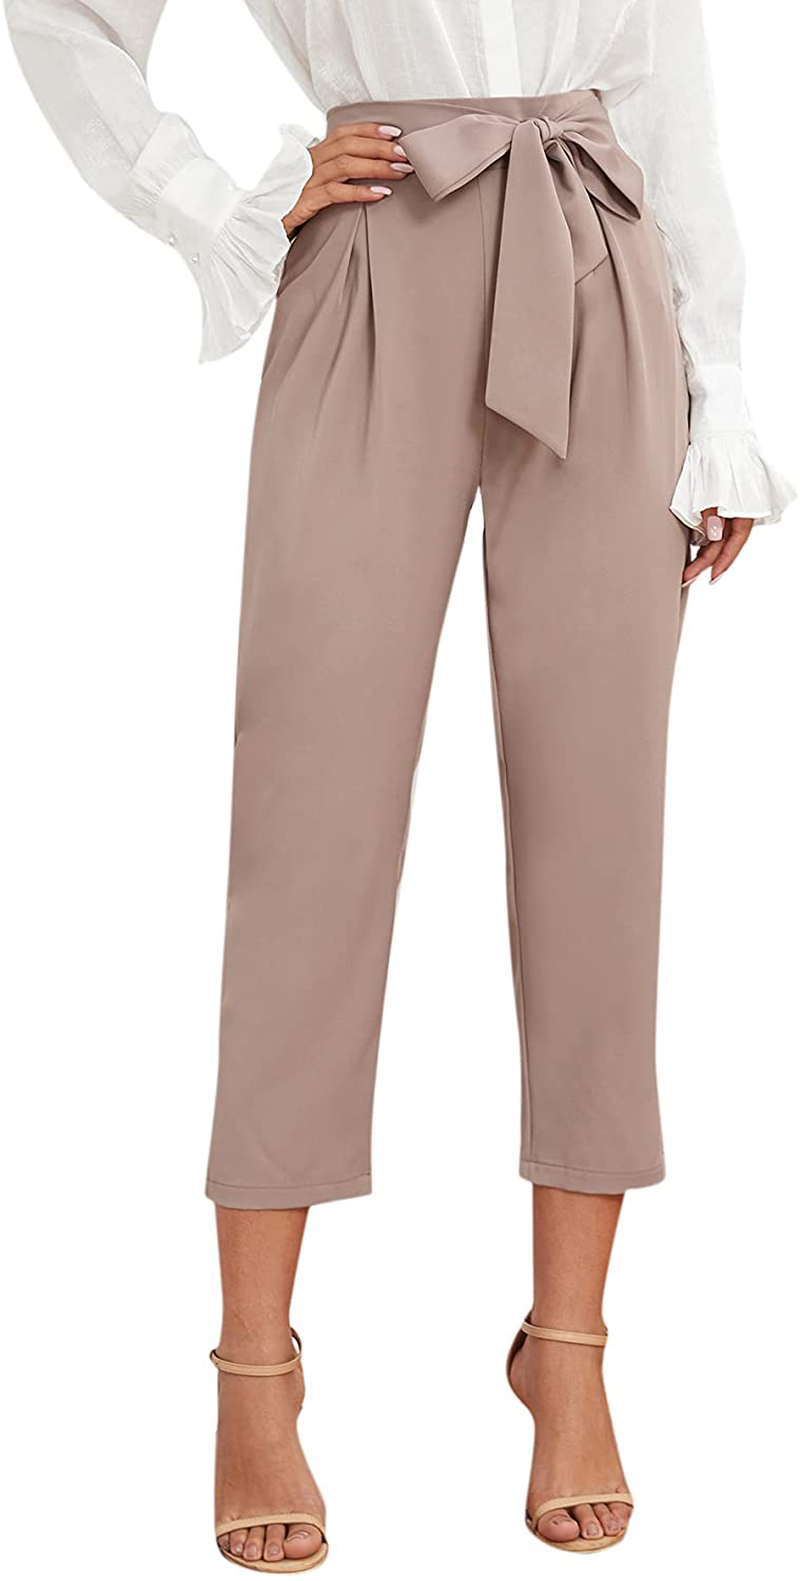 Milumia Women's Elegant Tie Front High Waisted Pants Pleated Work Office Ankle Pants